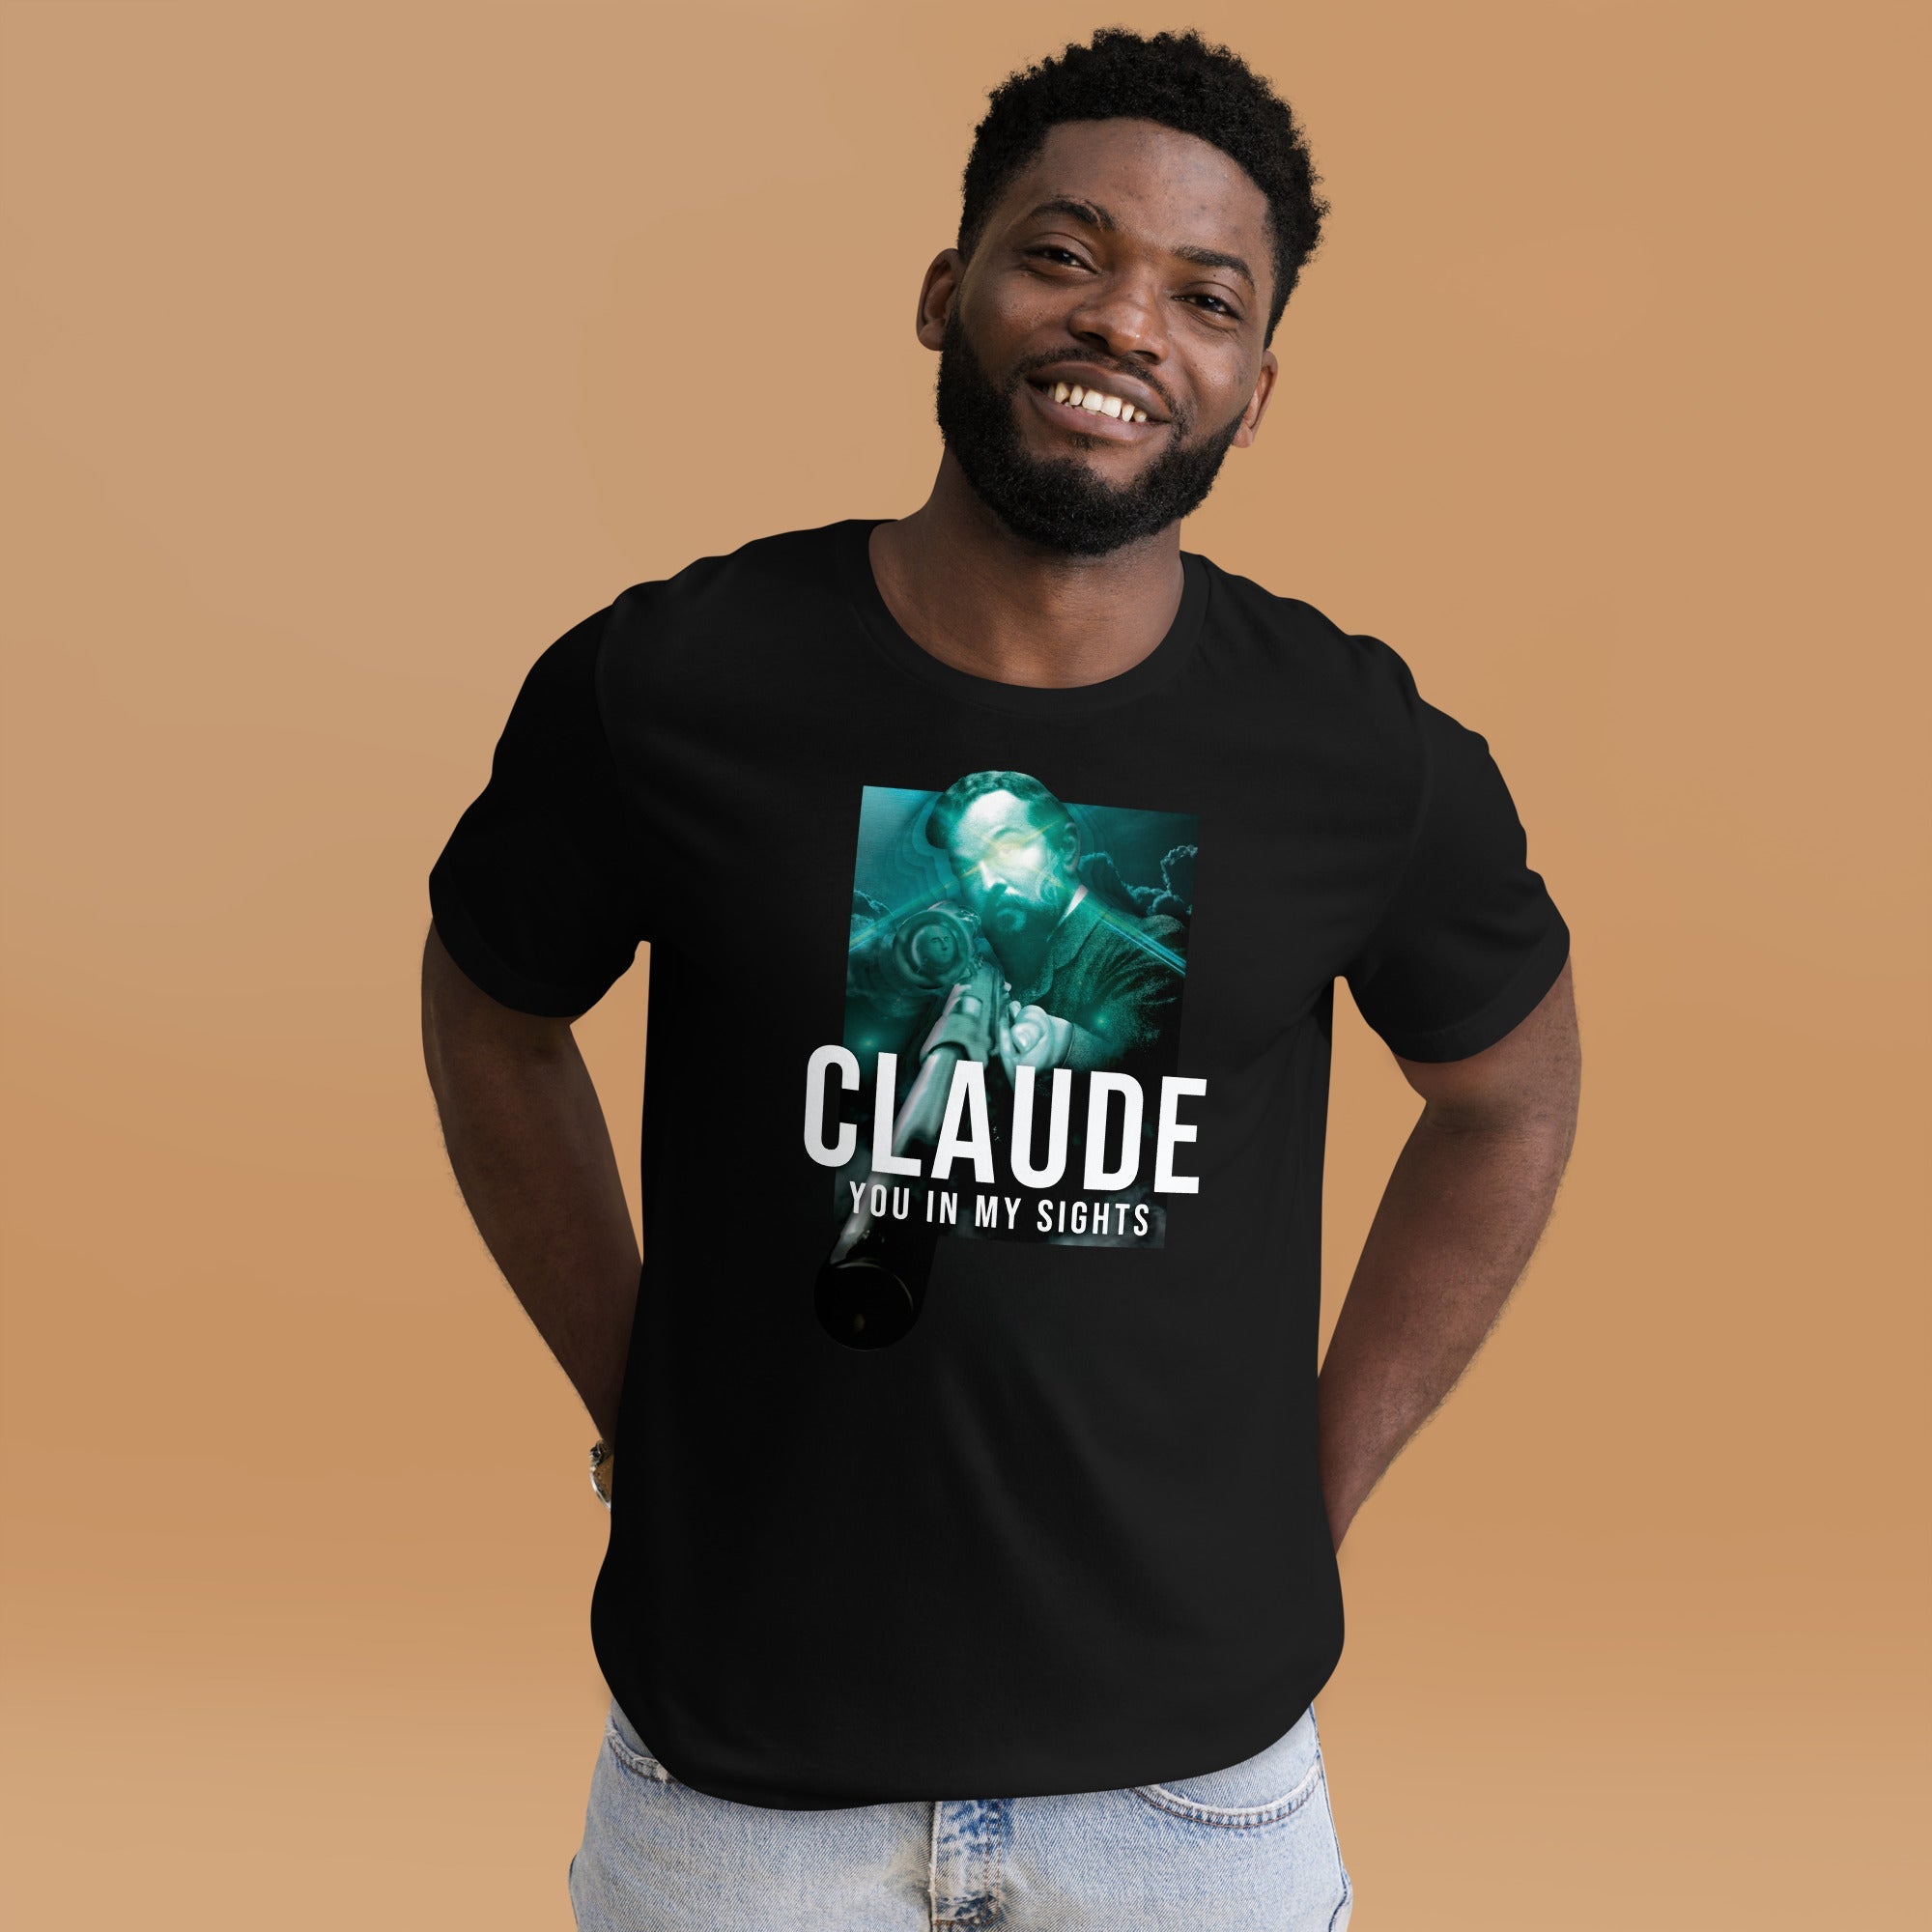 CLAUDE Tshirt - Lord of the Chords